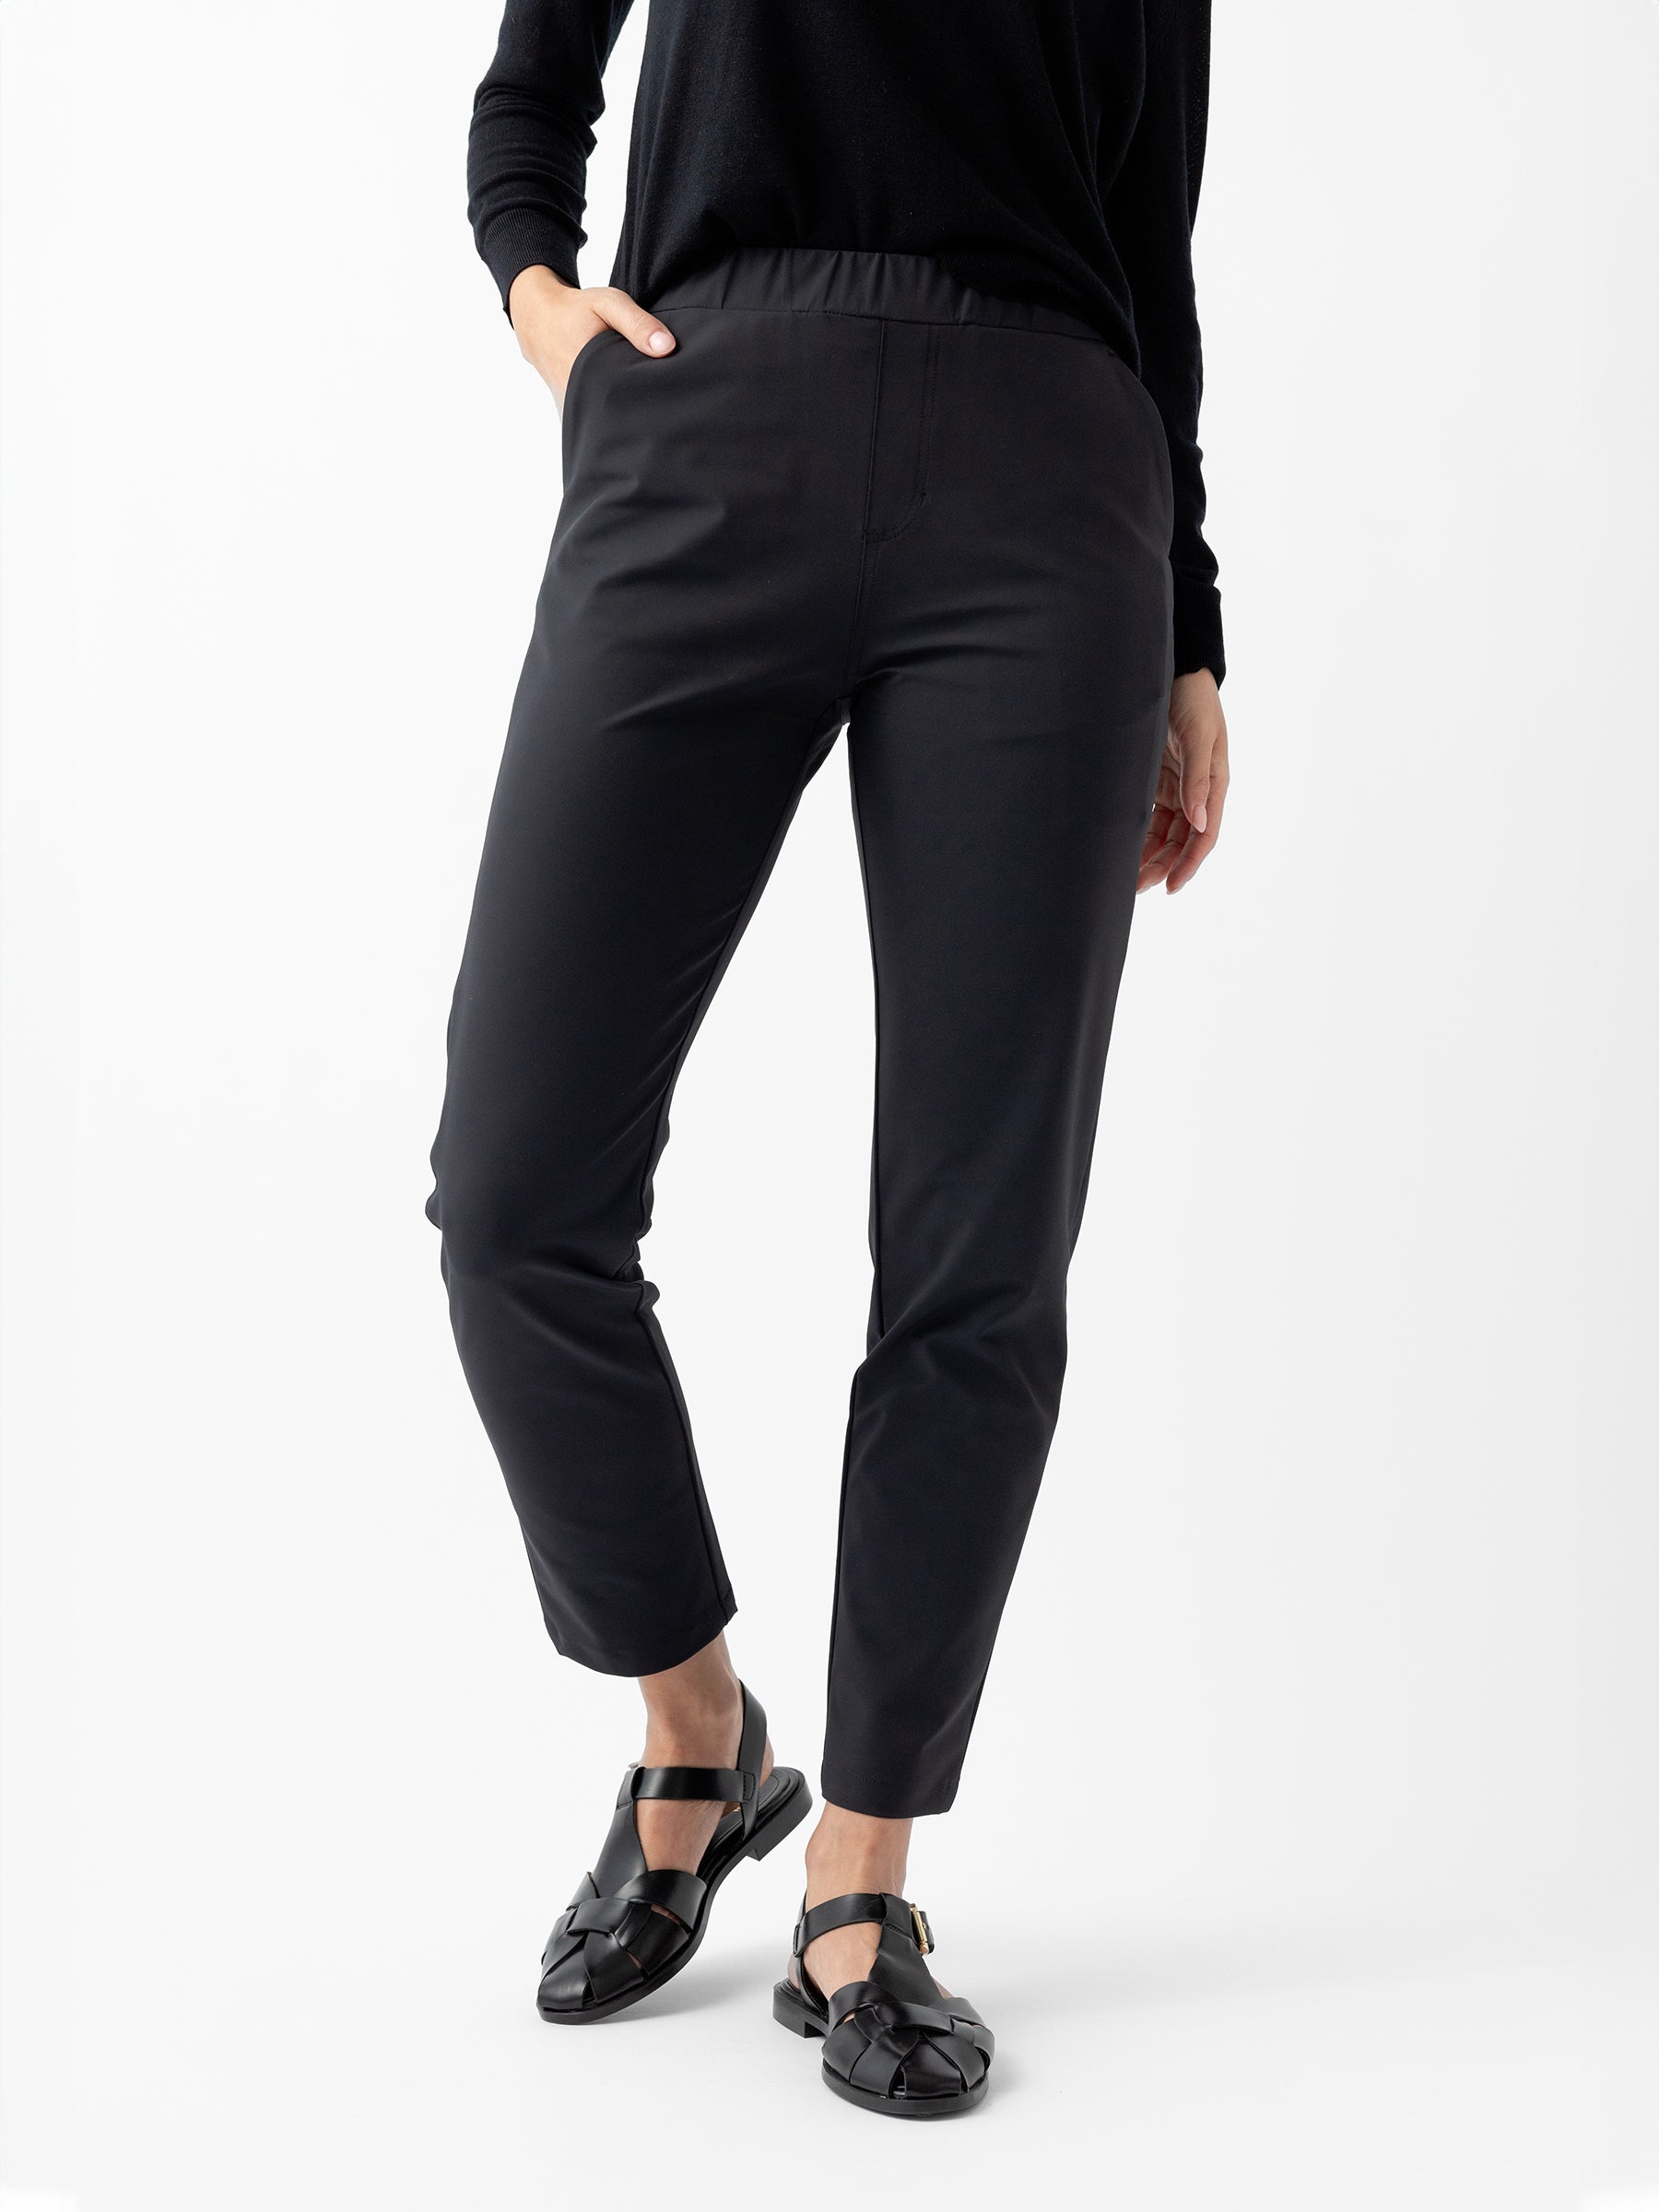 A person wearing Cozy Earth's Women's Always Cropped Pant in black and a black long-sleeve top is standing with one hand in their pocket. The person is also wearing black, open-back, closed-toe loafers. The background is plain white. |Color:Jet Black